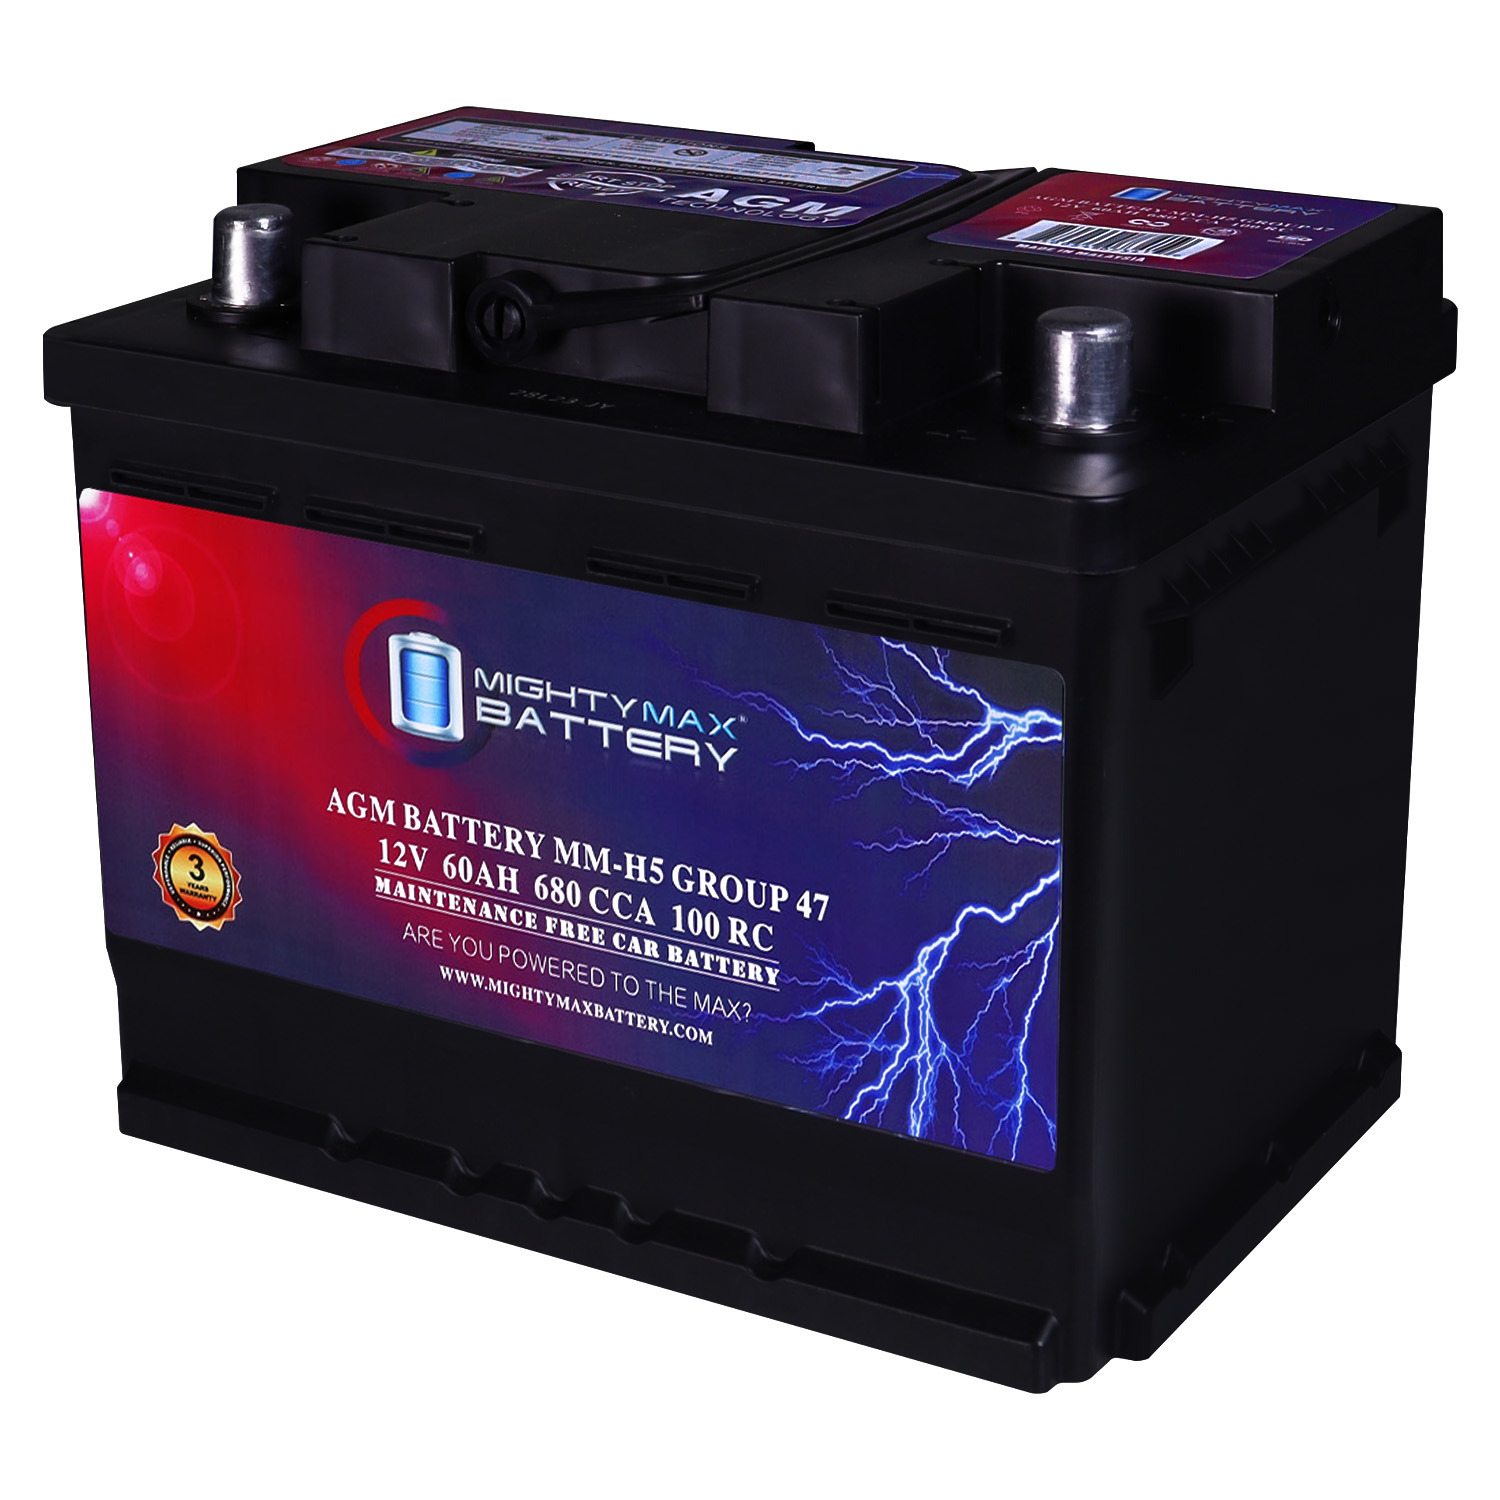 MM-H5 Group 47 12V 60AH 100RC 680CCA Replacement Battery Compatible with Nissan Maxima 19-23